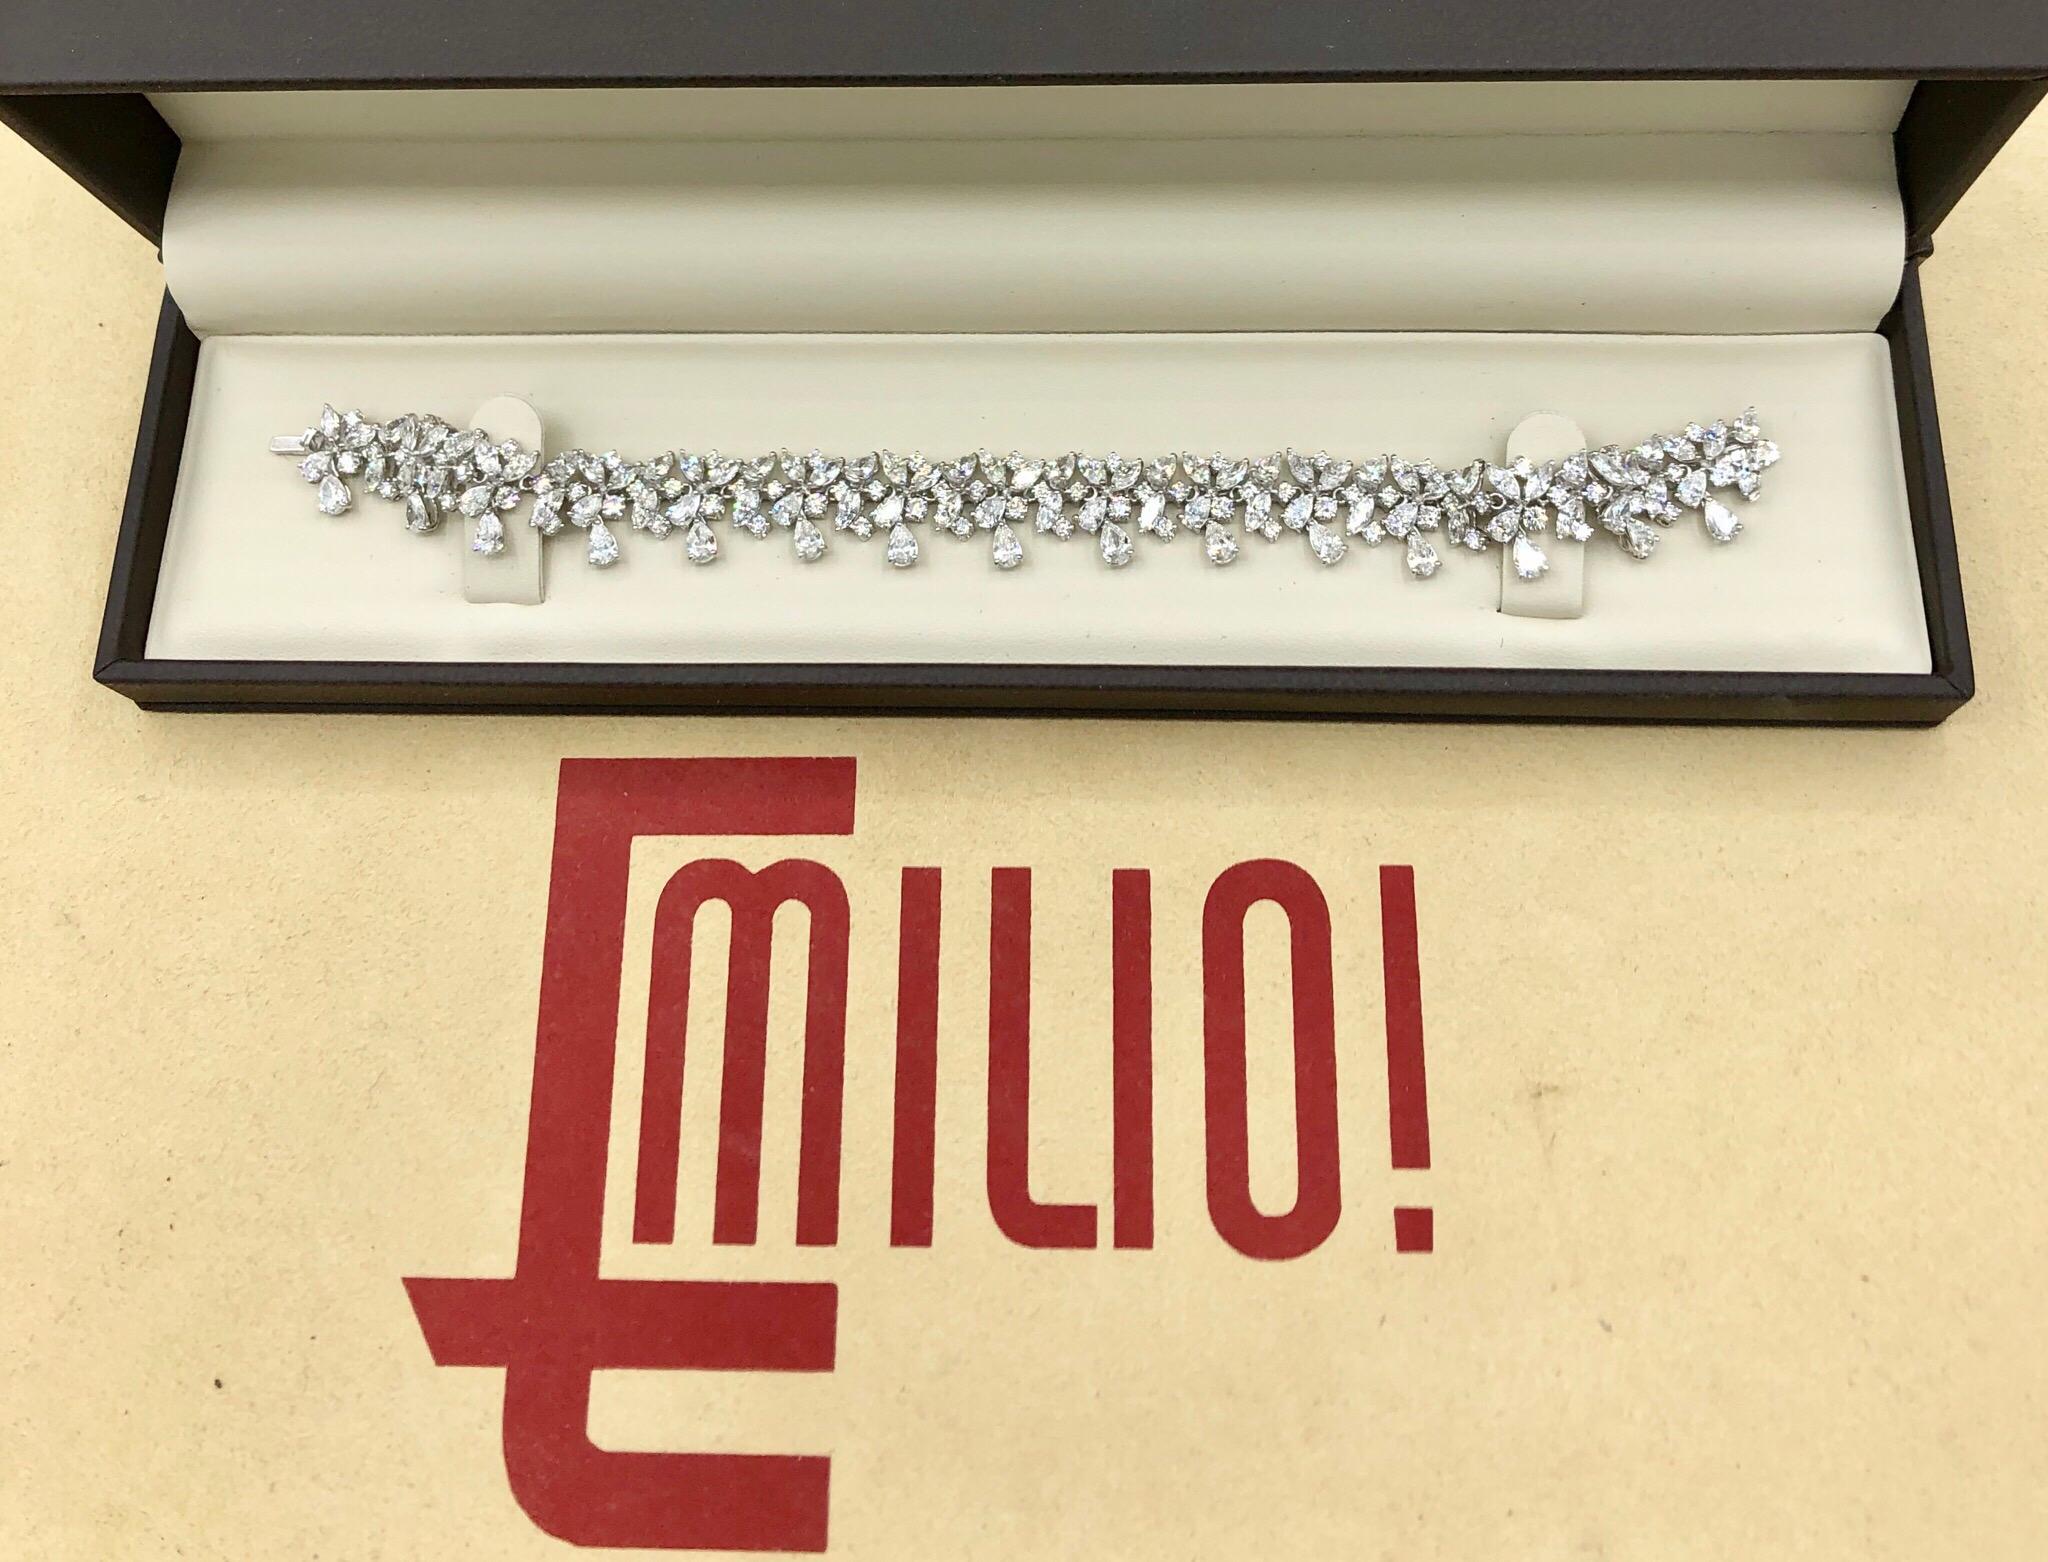 This amazing bracelet is also available was well thought out when Emilio designed it! Hand made in the Emilio Jewelry Factory, Here are the details
Metal: 18k
Diamonds: 15.72 total weight carats mixed shapes including princess cut, round, and